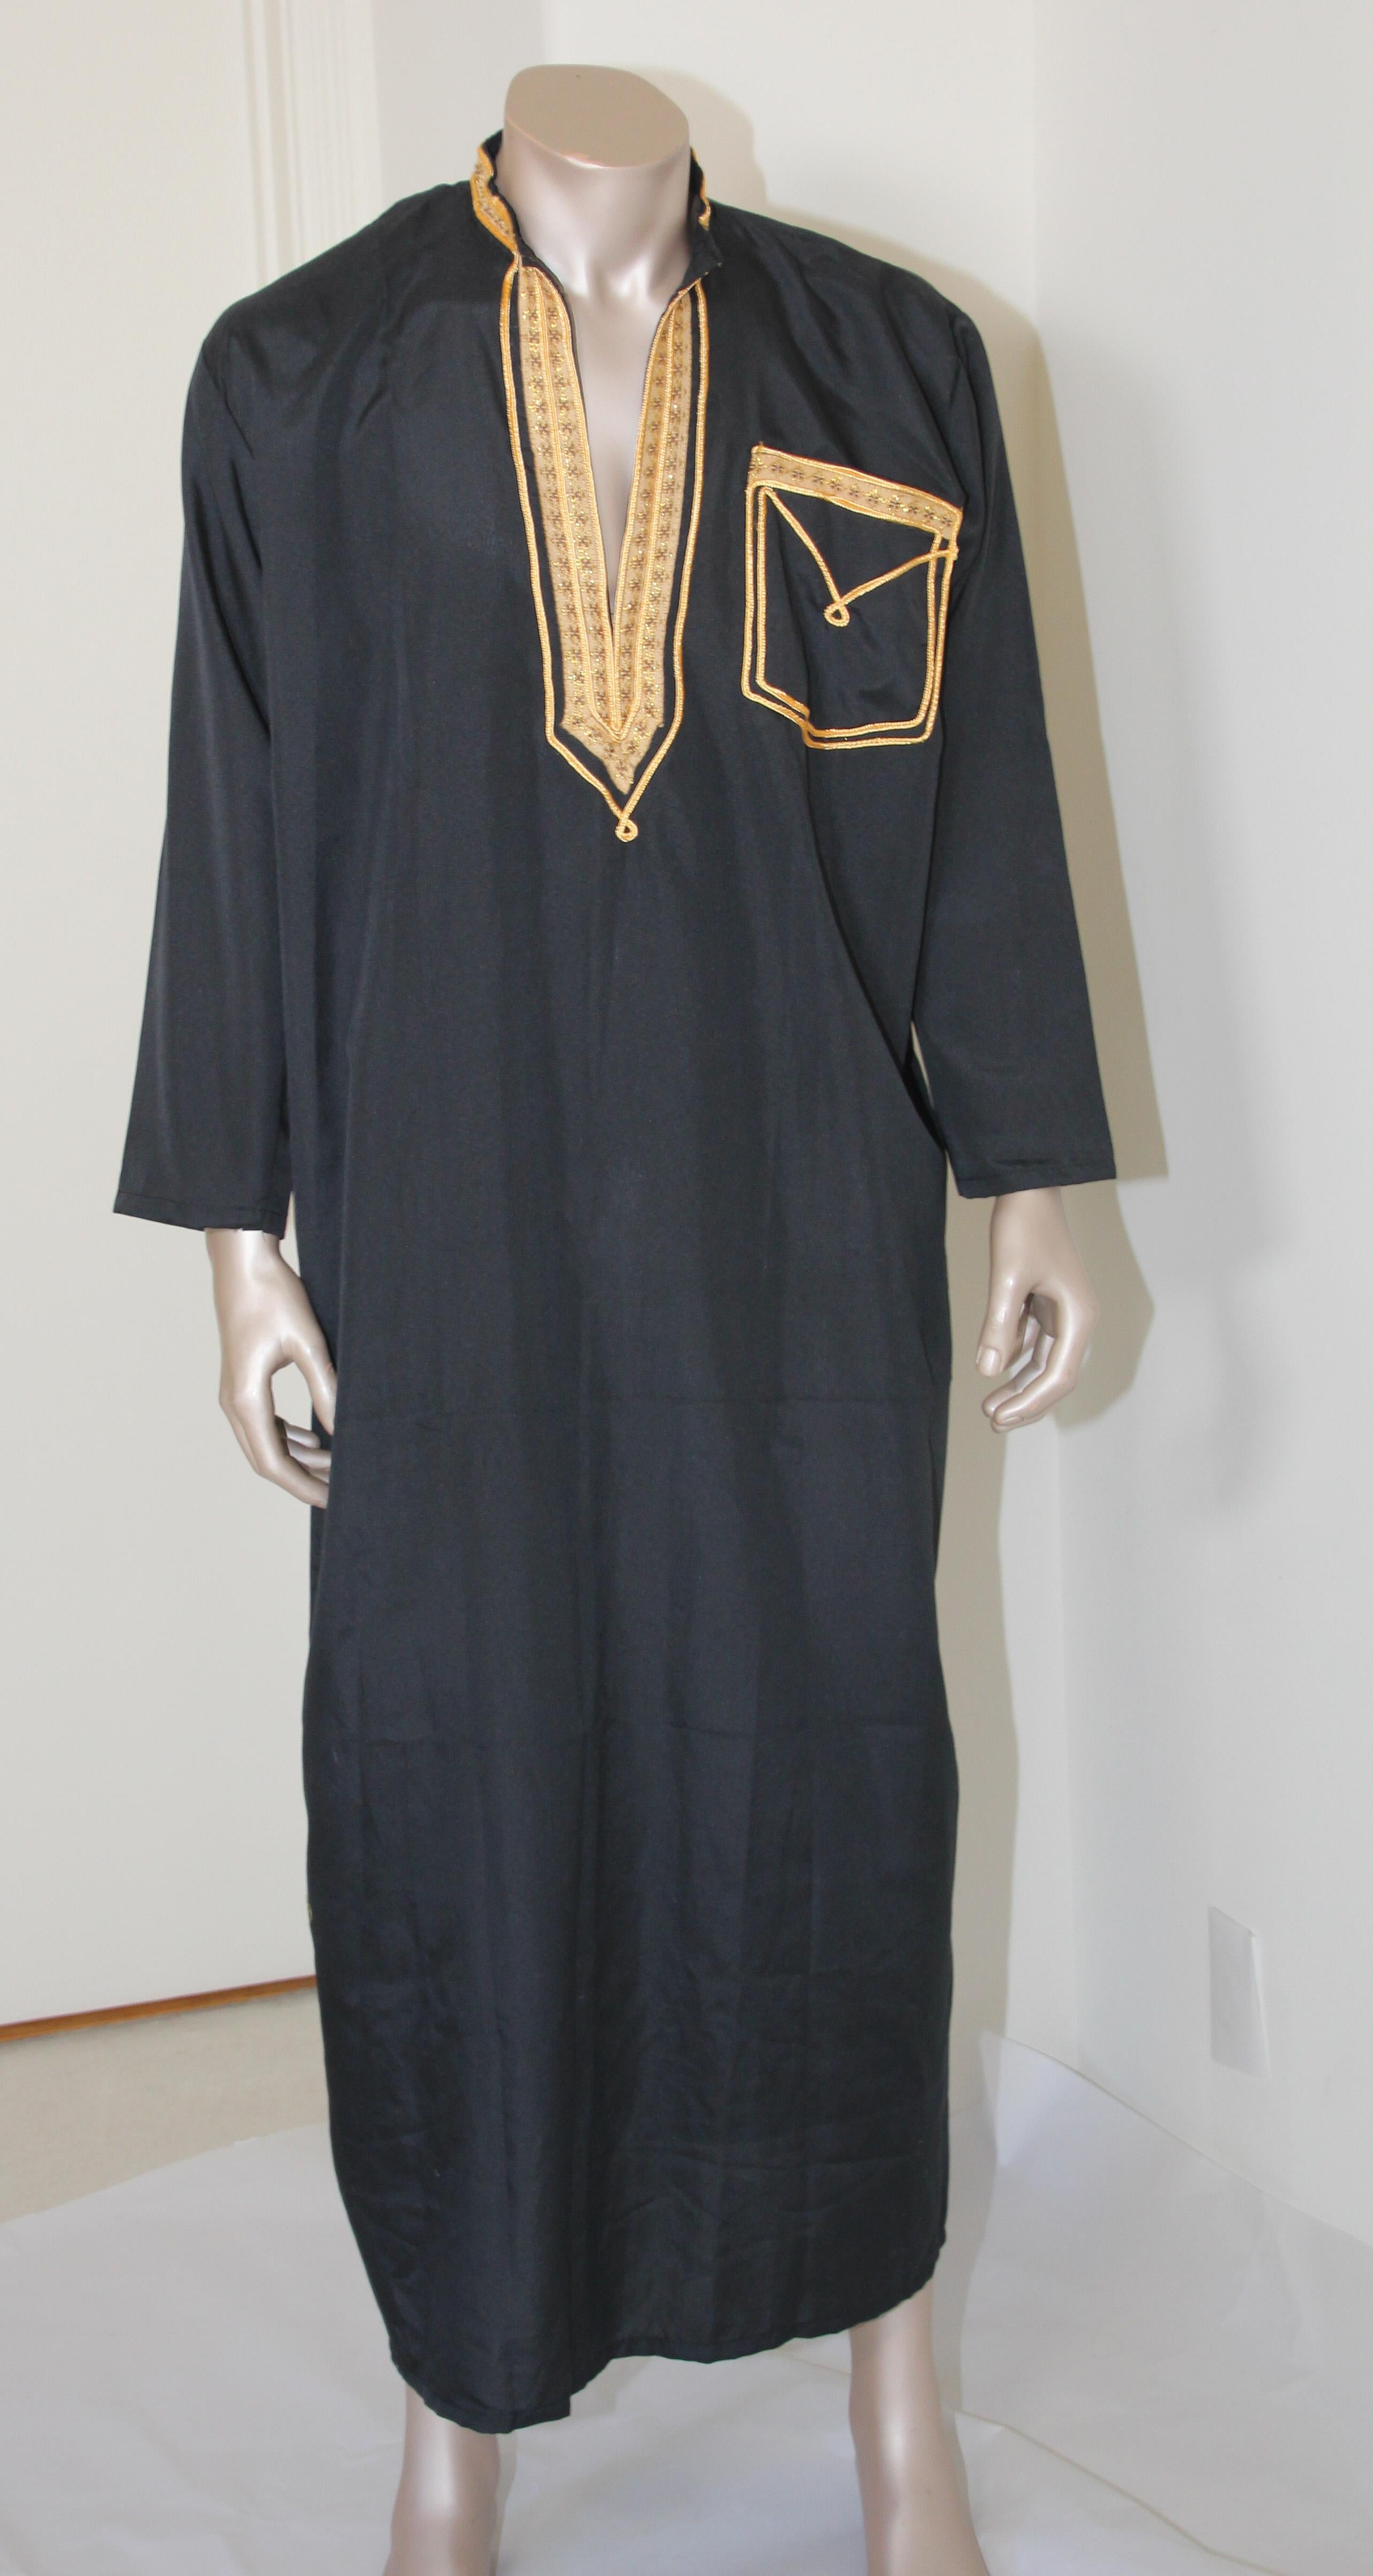 Vintage Middle Eastern gentleman black caftan with yellow gold trim,
circa 1970.
This vintage kaftan features a traditional neckline and a pocket with gold trim and long sleeves.
From the Middle East to North Africa, like Morocco, fashion